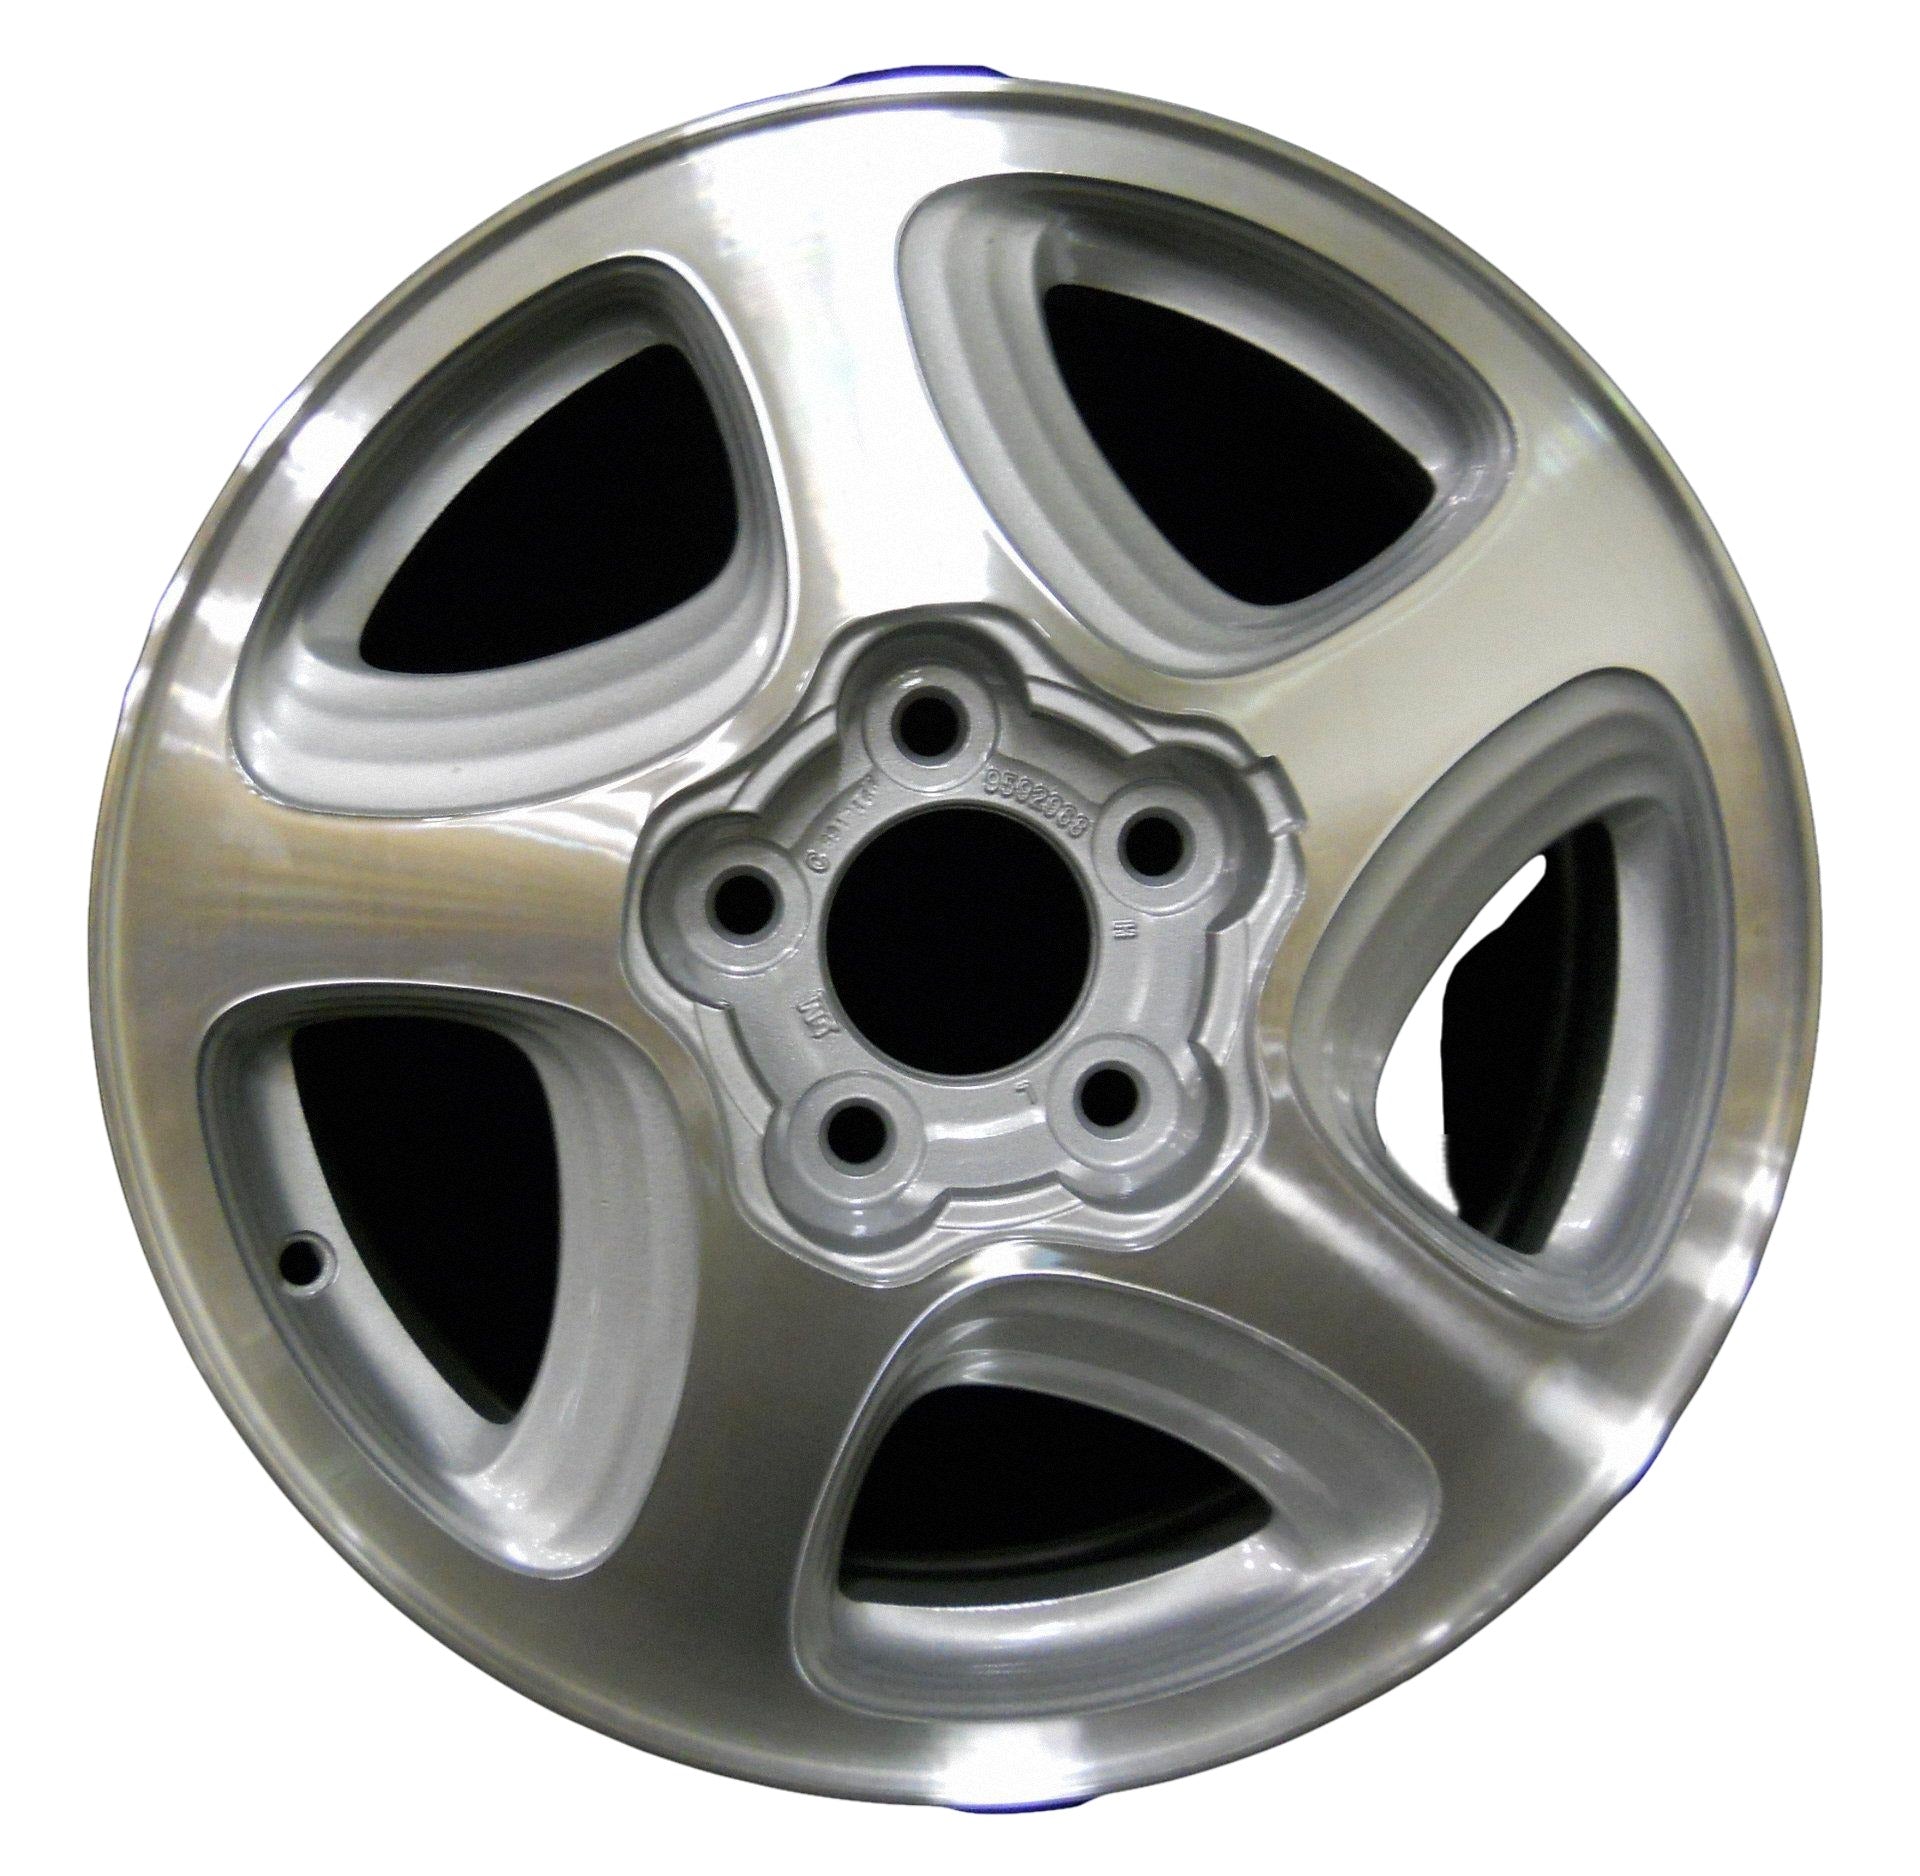 Chevrolet Monte Carlo  2000, 2001, 2002, 2003, 2004, 2005 Factory OEM Car Wheel Size 16x6.5 Alloy WAO.5085.PS02.MA